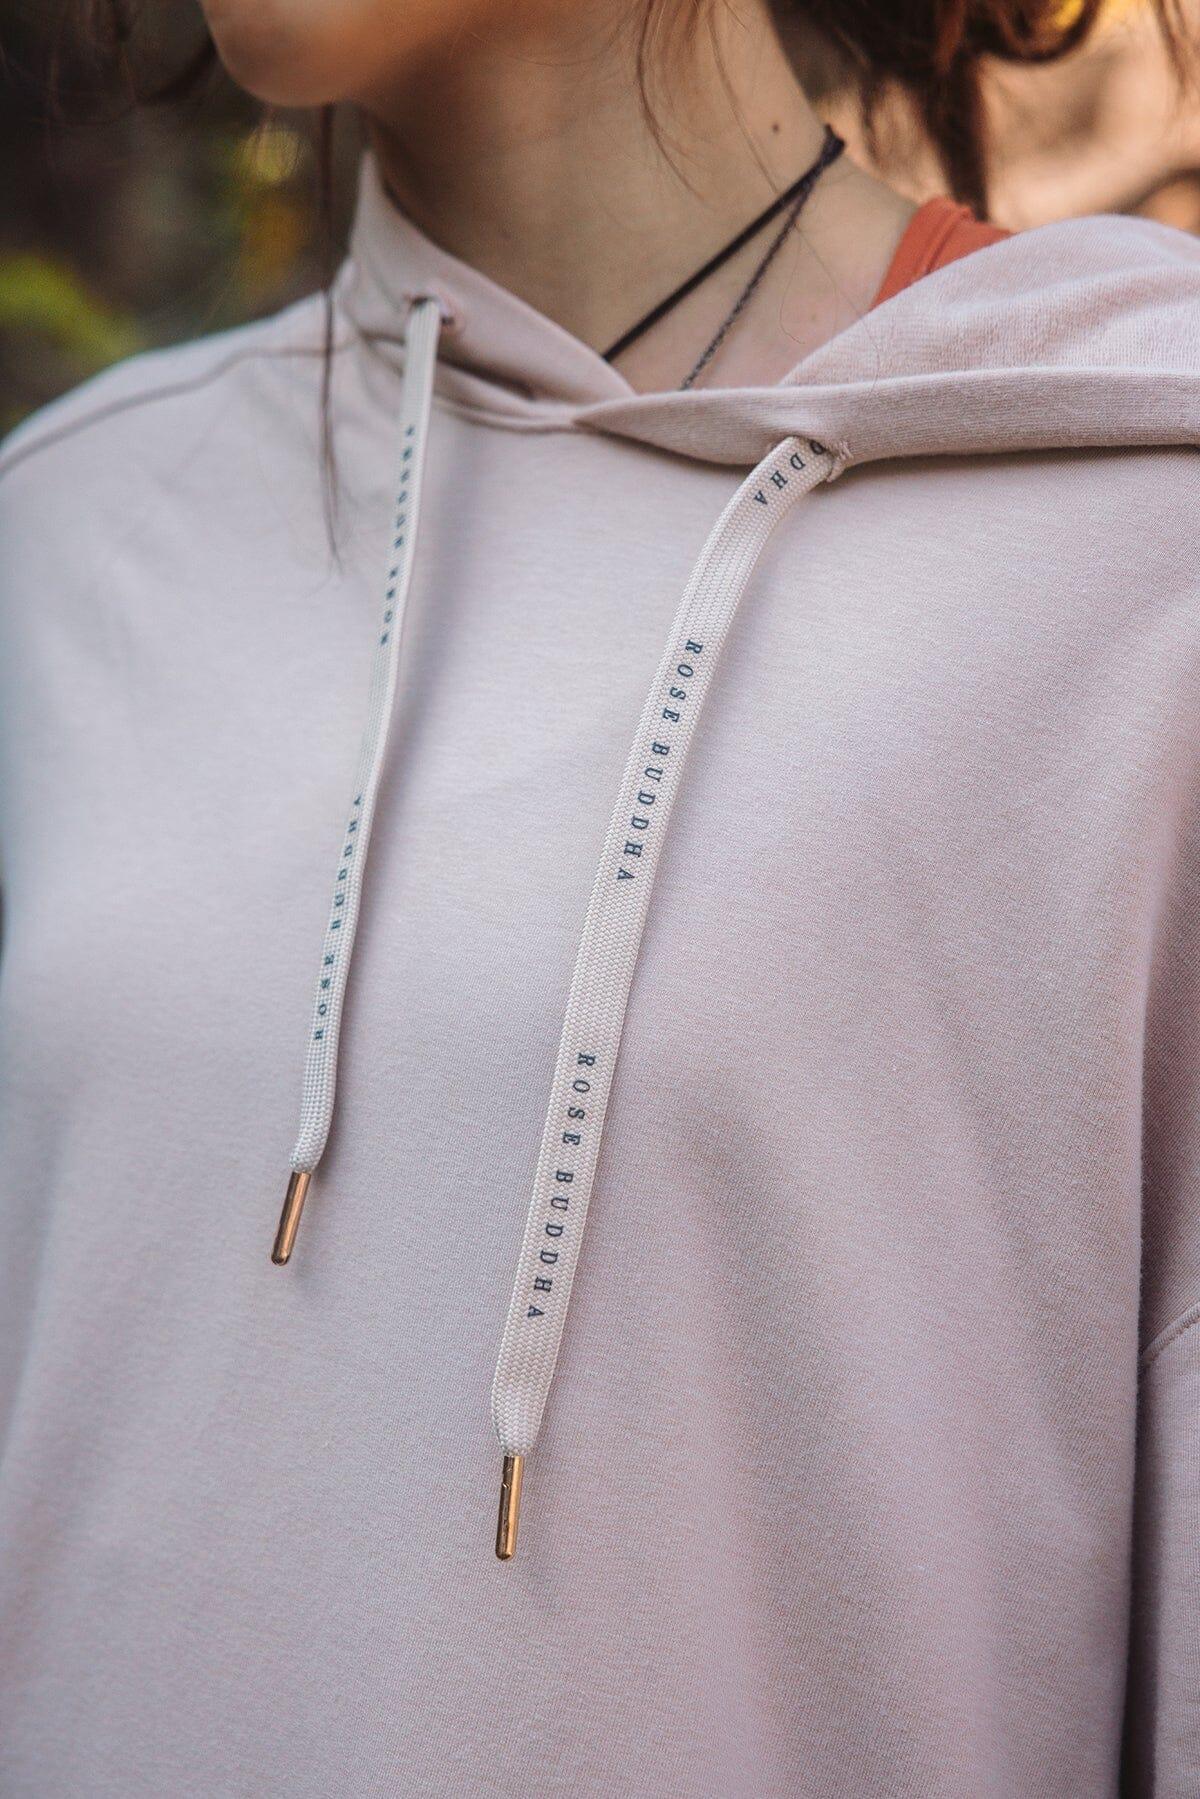 Femme qui porte le chandail Chill out de Rose Boreal./ Women wearing the Chill Out Hoodie by Rose Boreal. -Grisaille